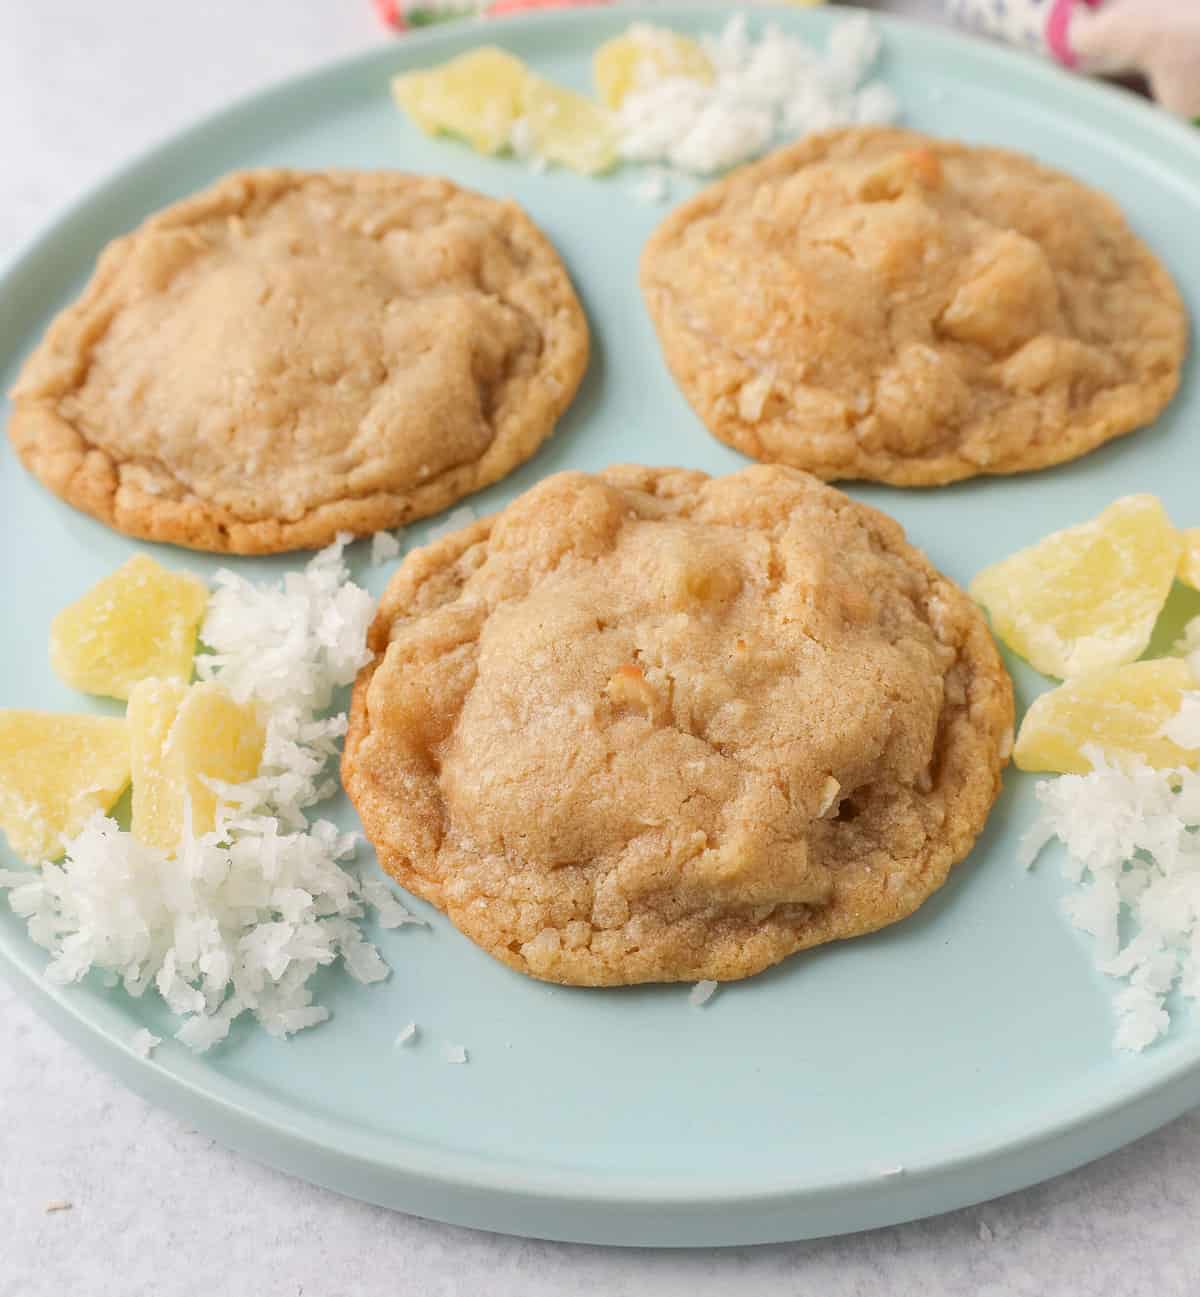 Coconut Pineapple Cookies. Soft chewy pina colada cookies with sweetened dried pineapple and sweet coconut flakes. These Hawaiian Pineapple Coconut Cookies are the perfect summer cookie.